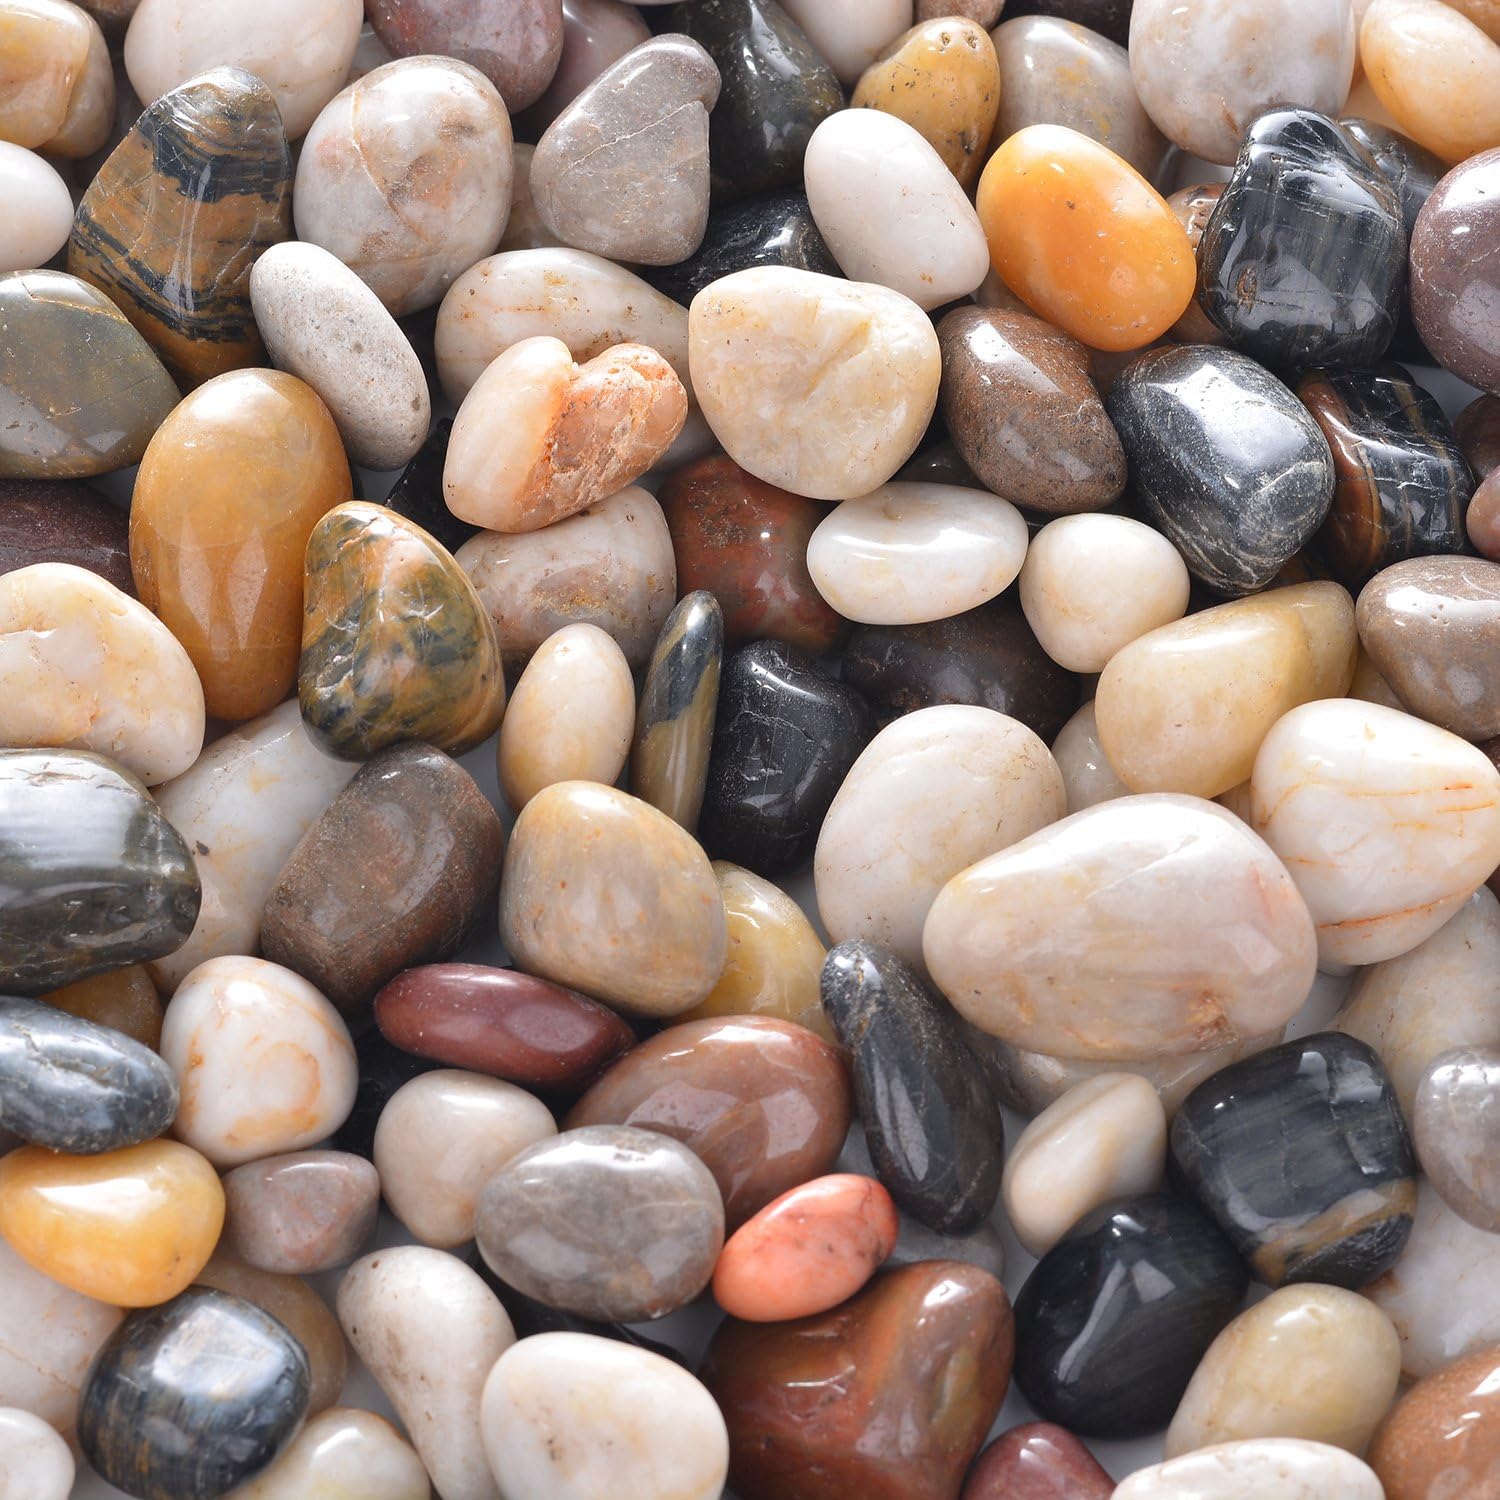 Midwest Hearth Natural Decorative Polished Mixed Pebbles 3/8 Gravel Size 10-lb Bag